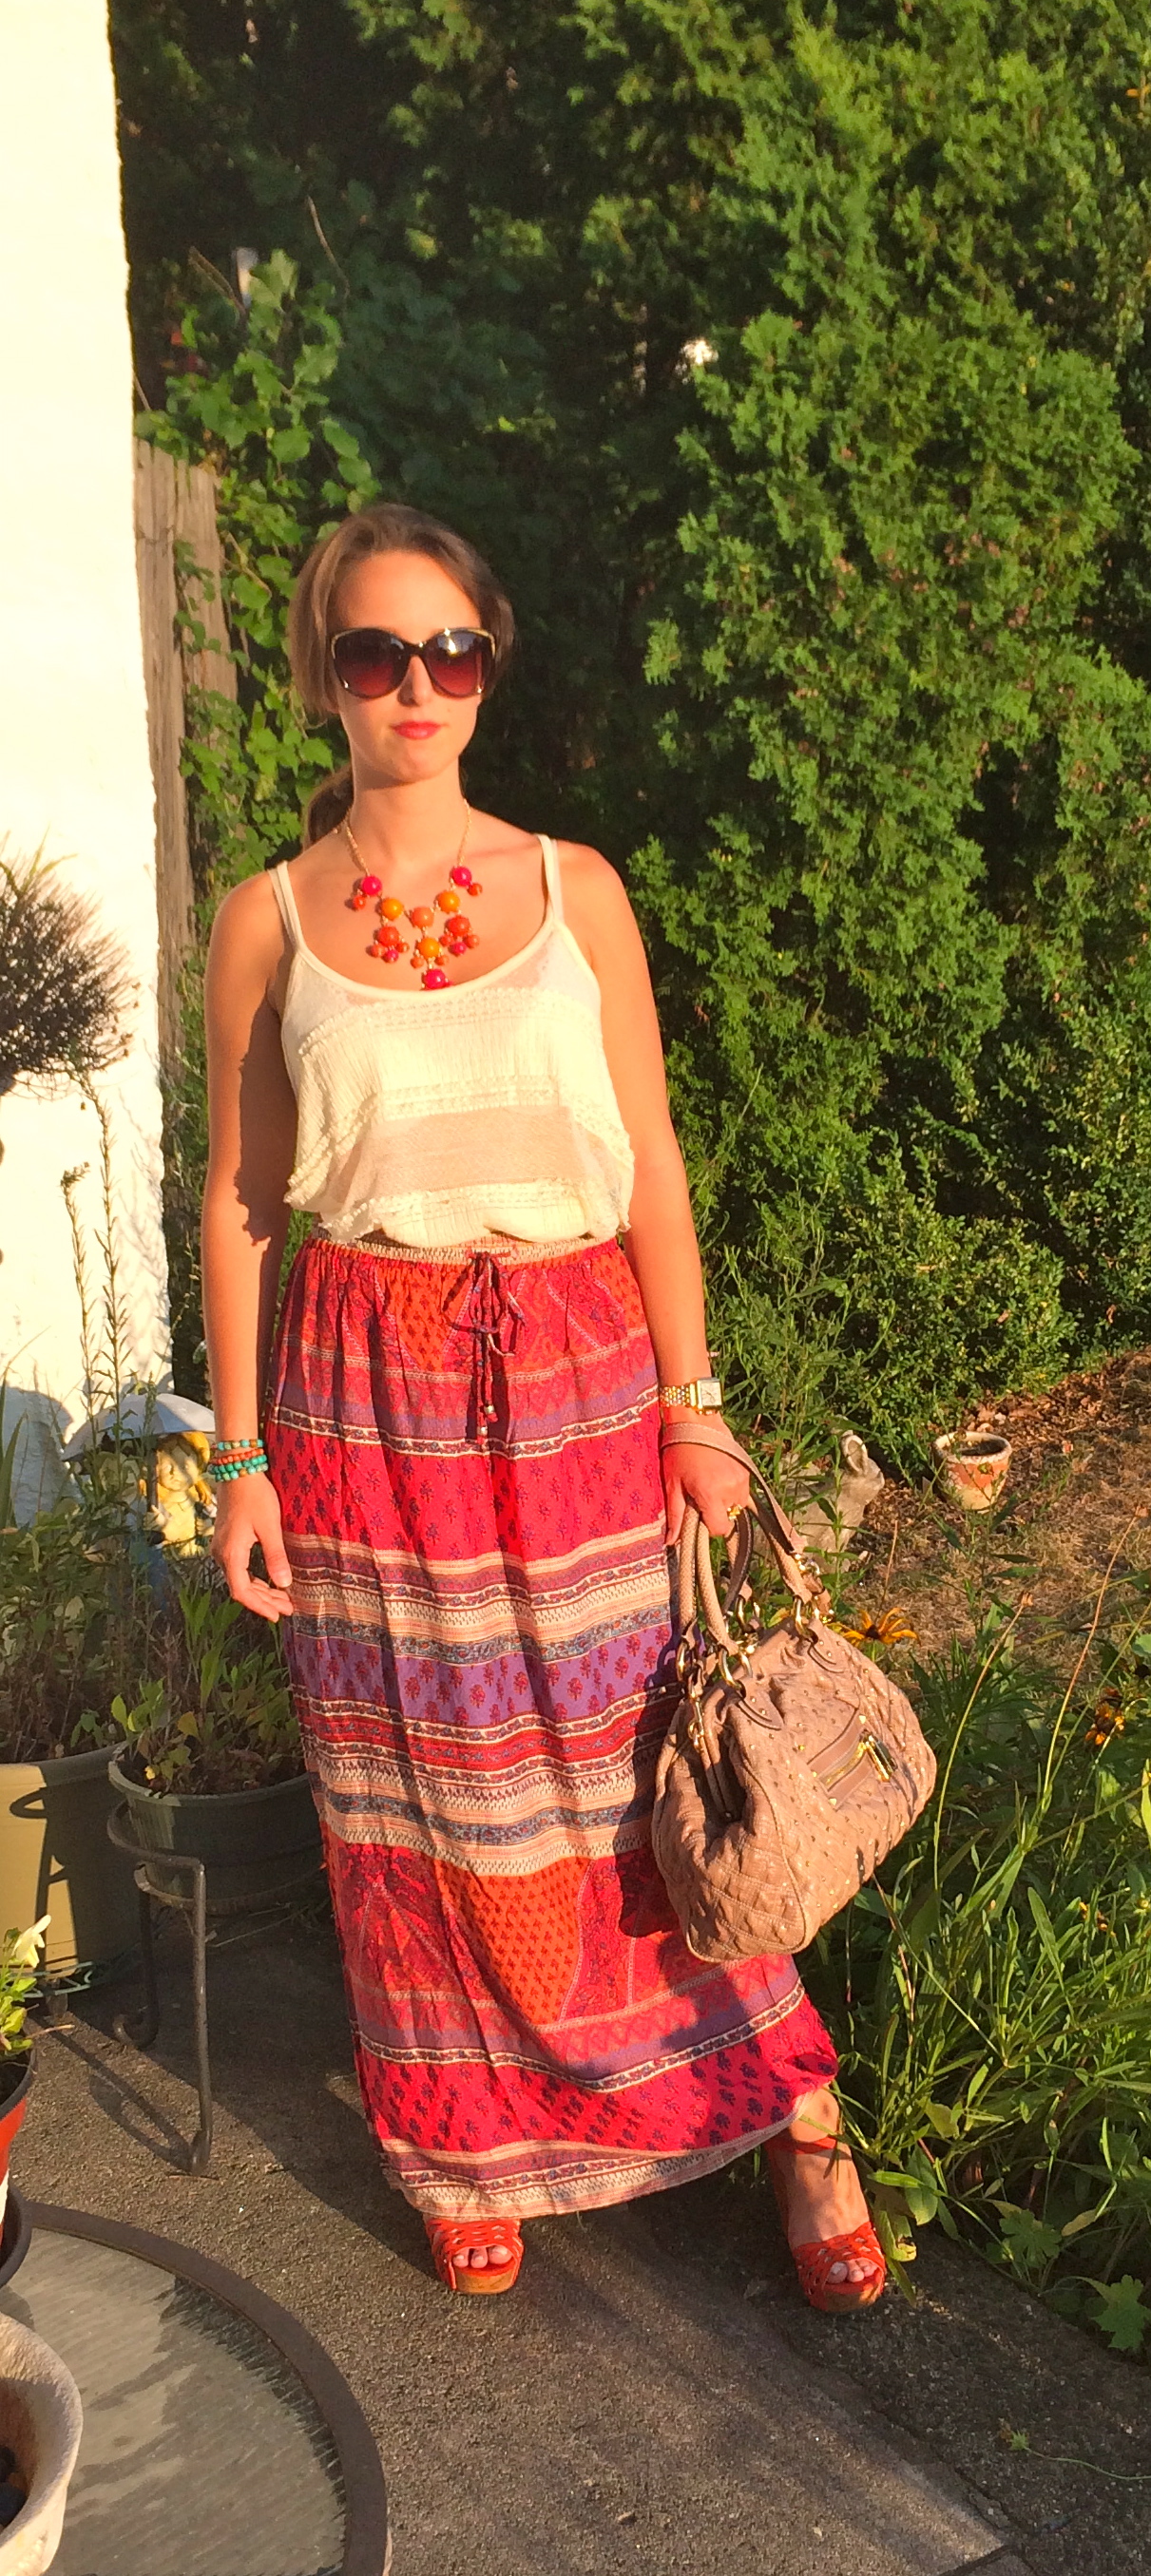 Fashion Friday: It’s all in the Skirt